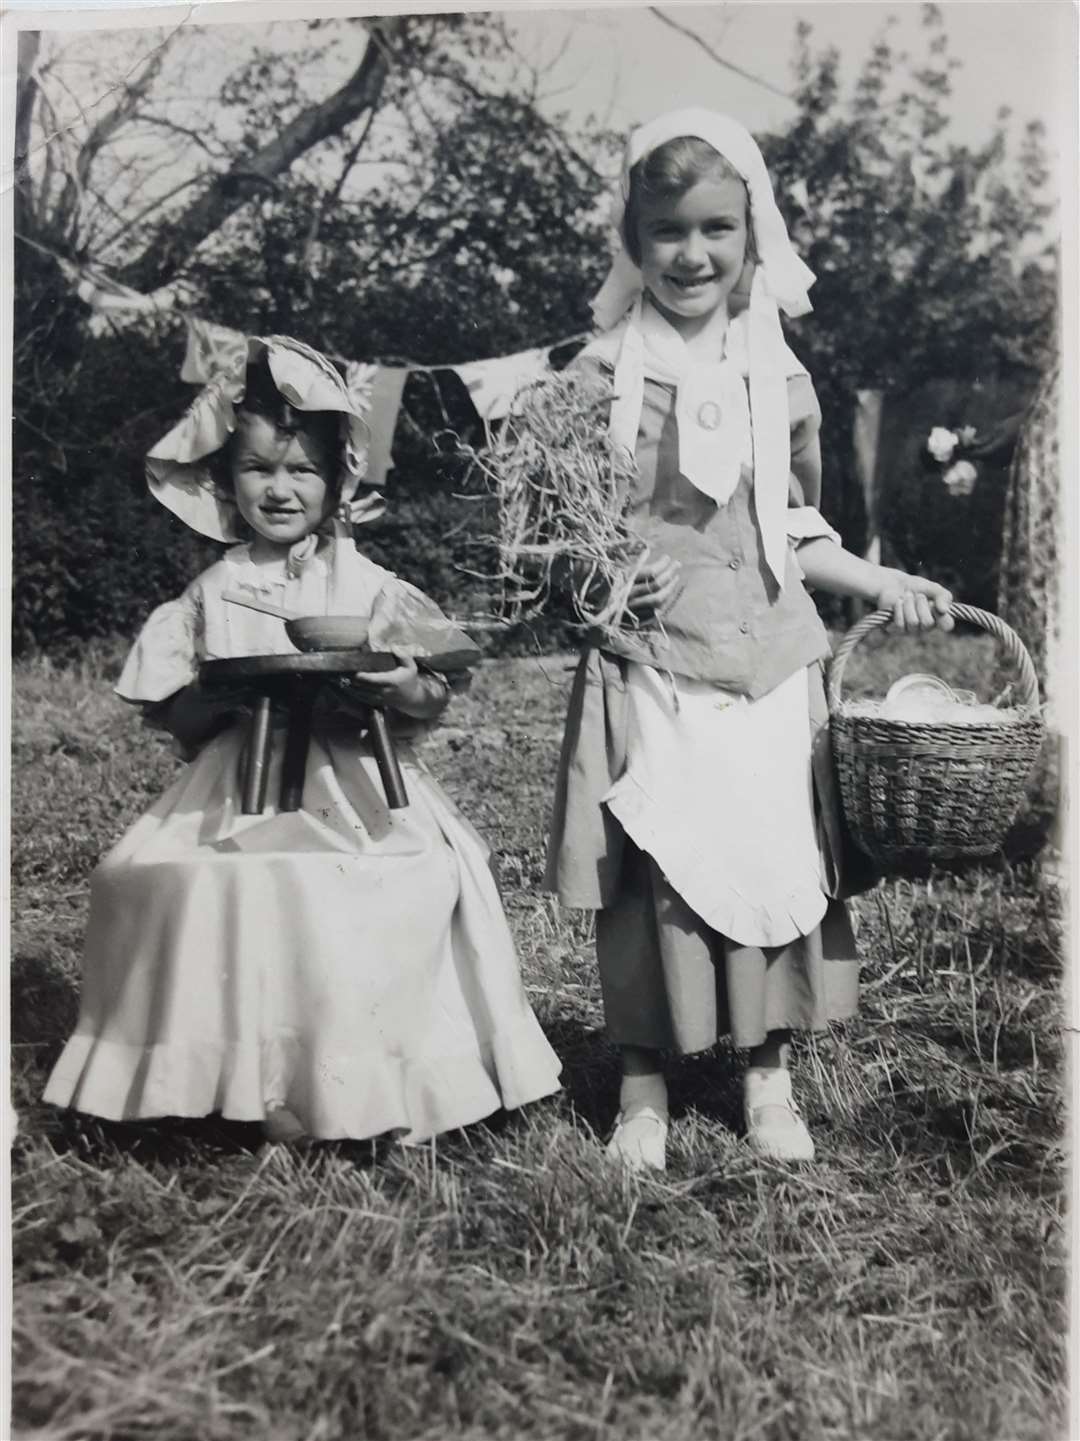 Historic photo of Heather Littlewood, left, nee Drowley and her sister Pauline Day dressed as Little Miss Muffet and the Ovaltine lady to mark the Queen's coronation in 1953